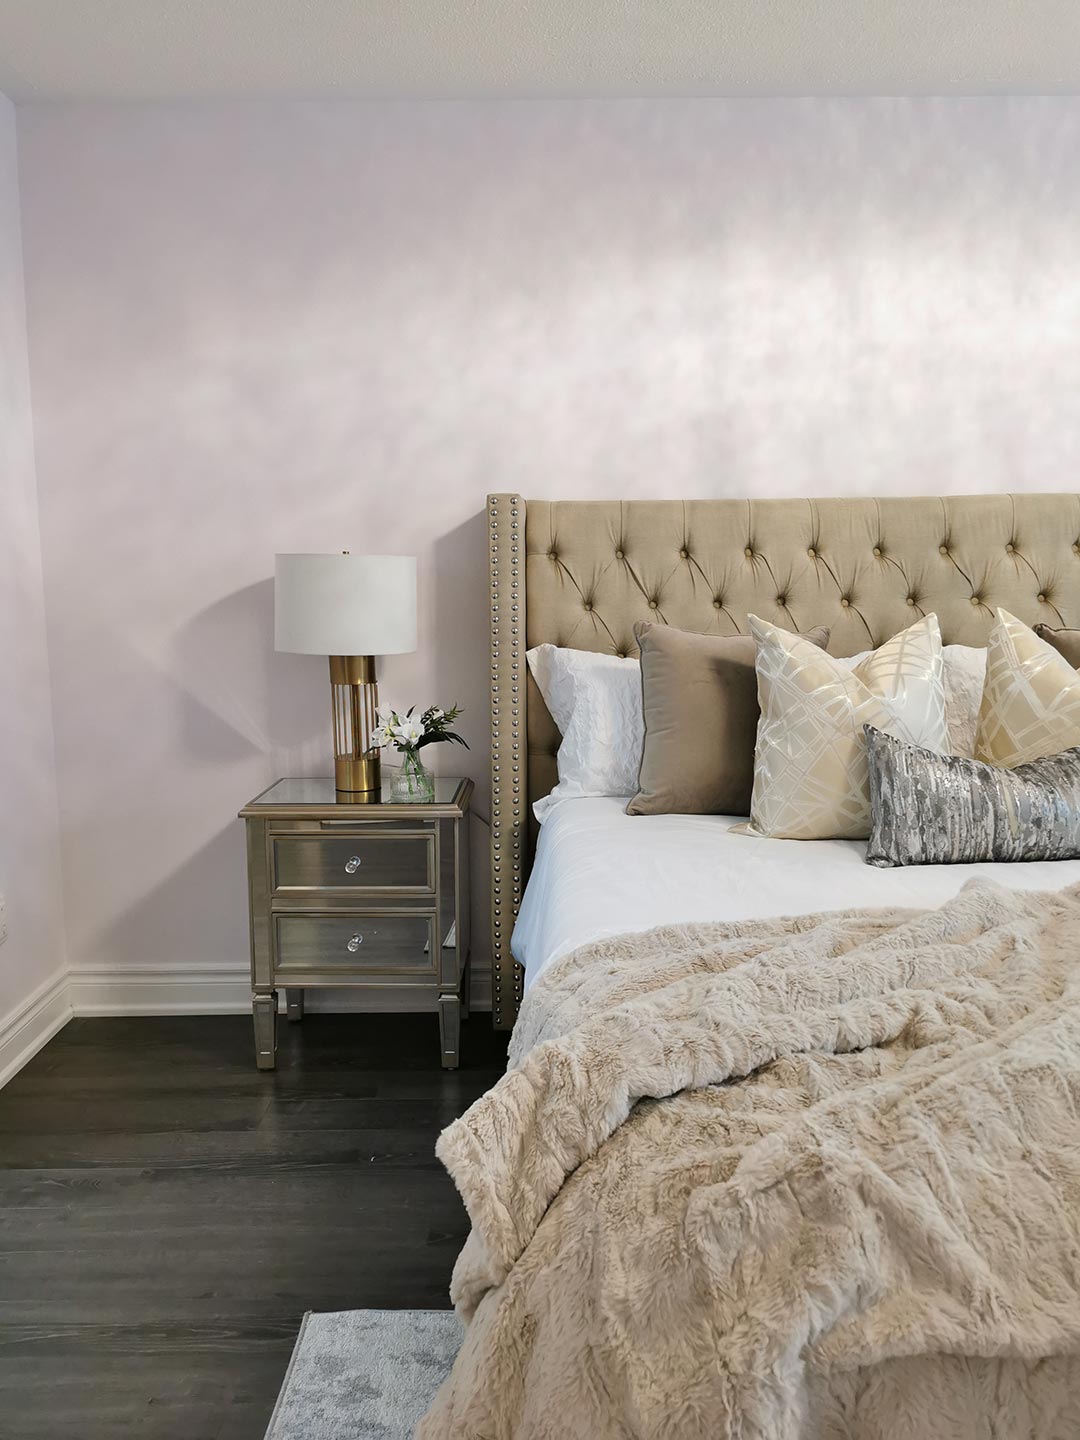 Bedroom styled by an interior designer showing half the bed and a side table